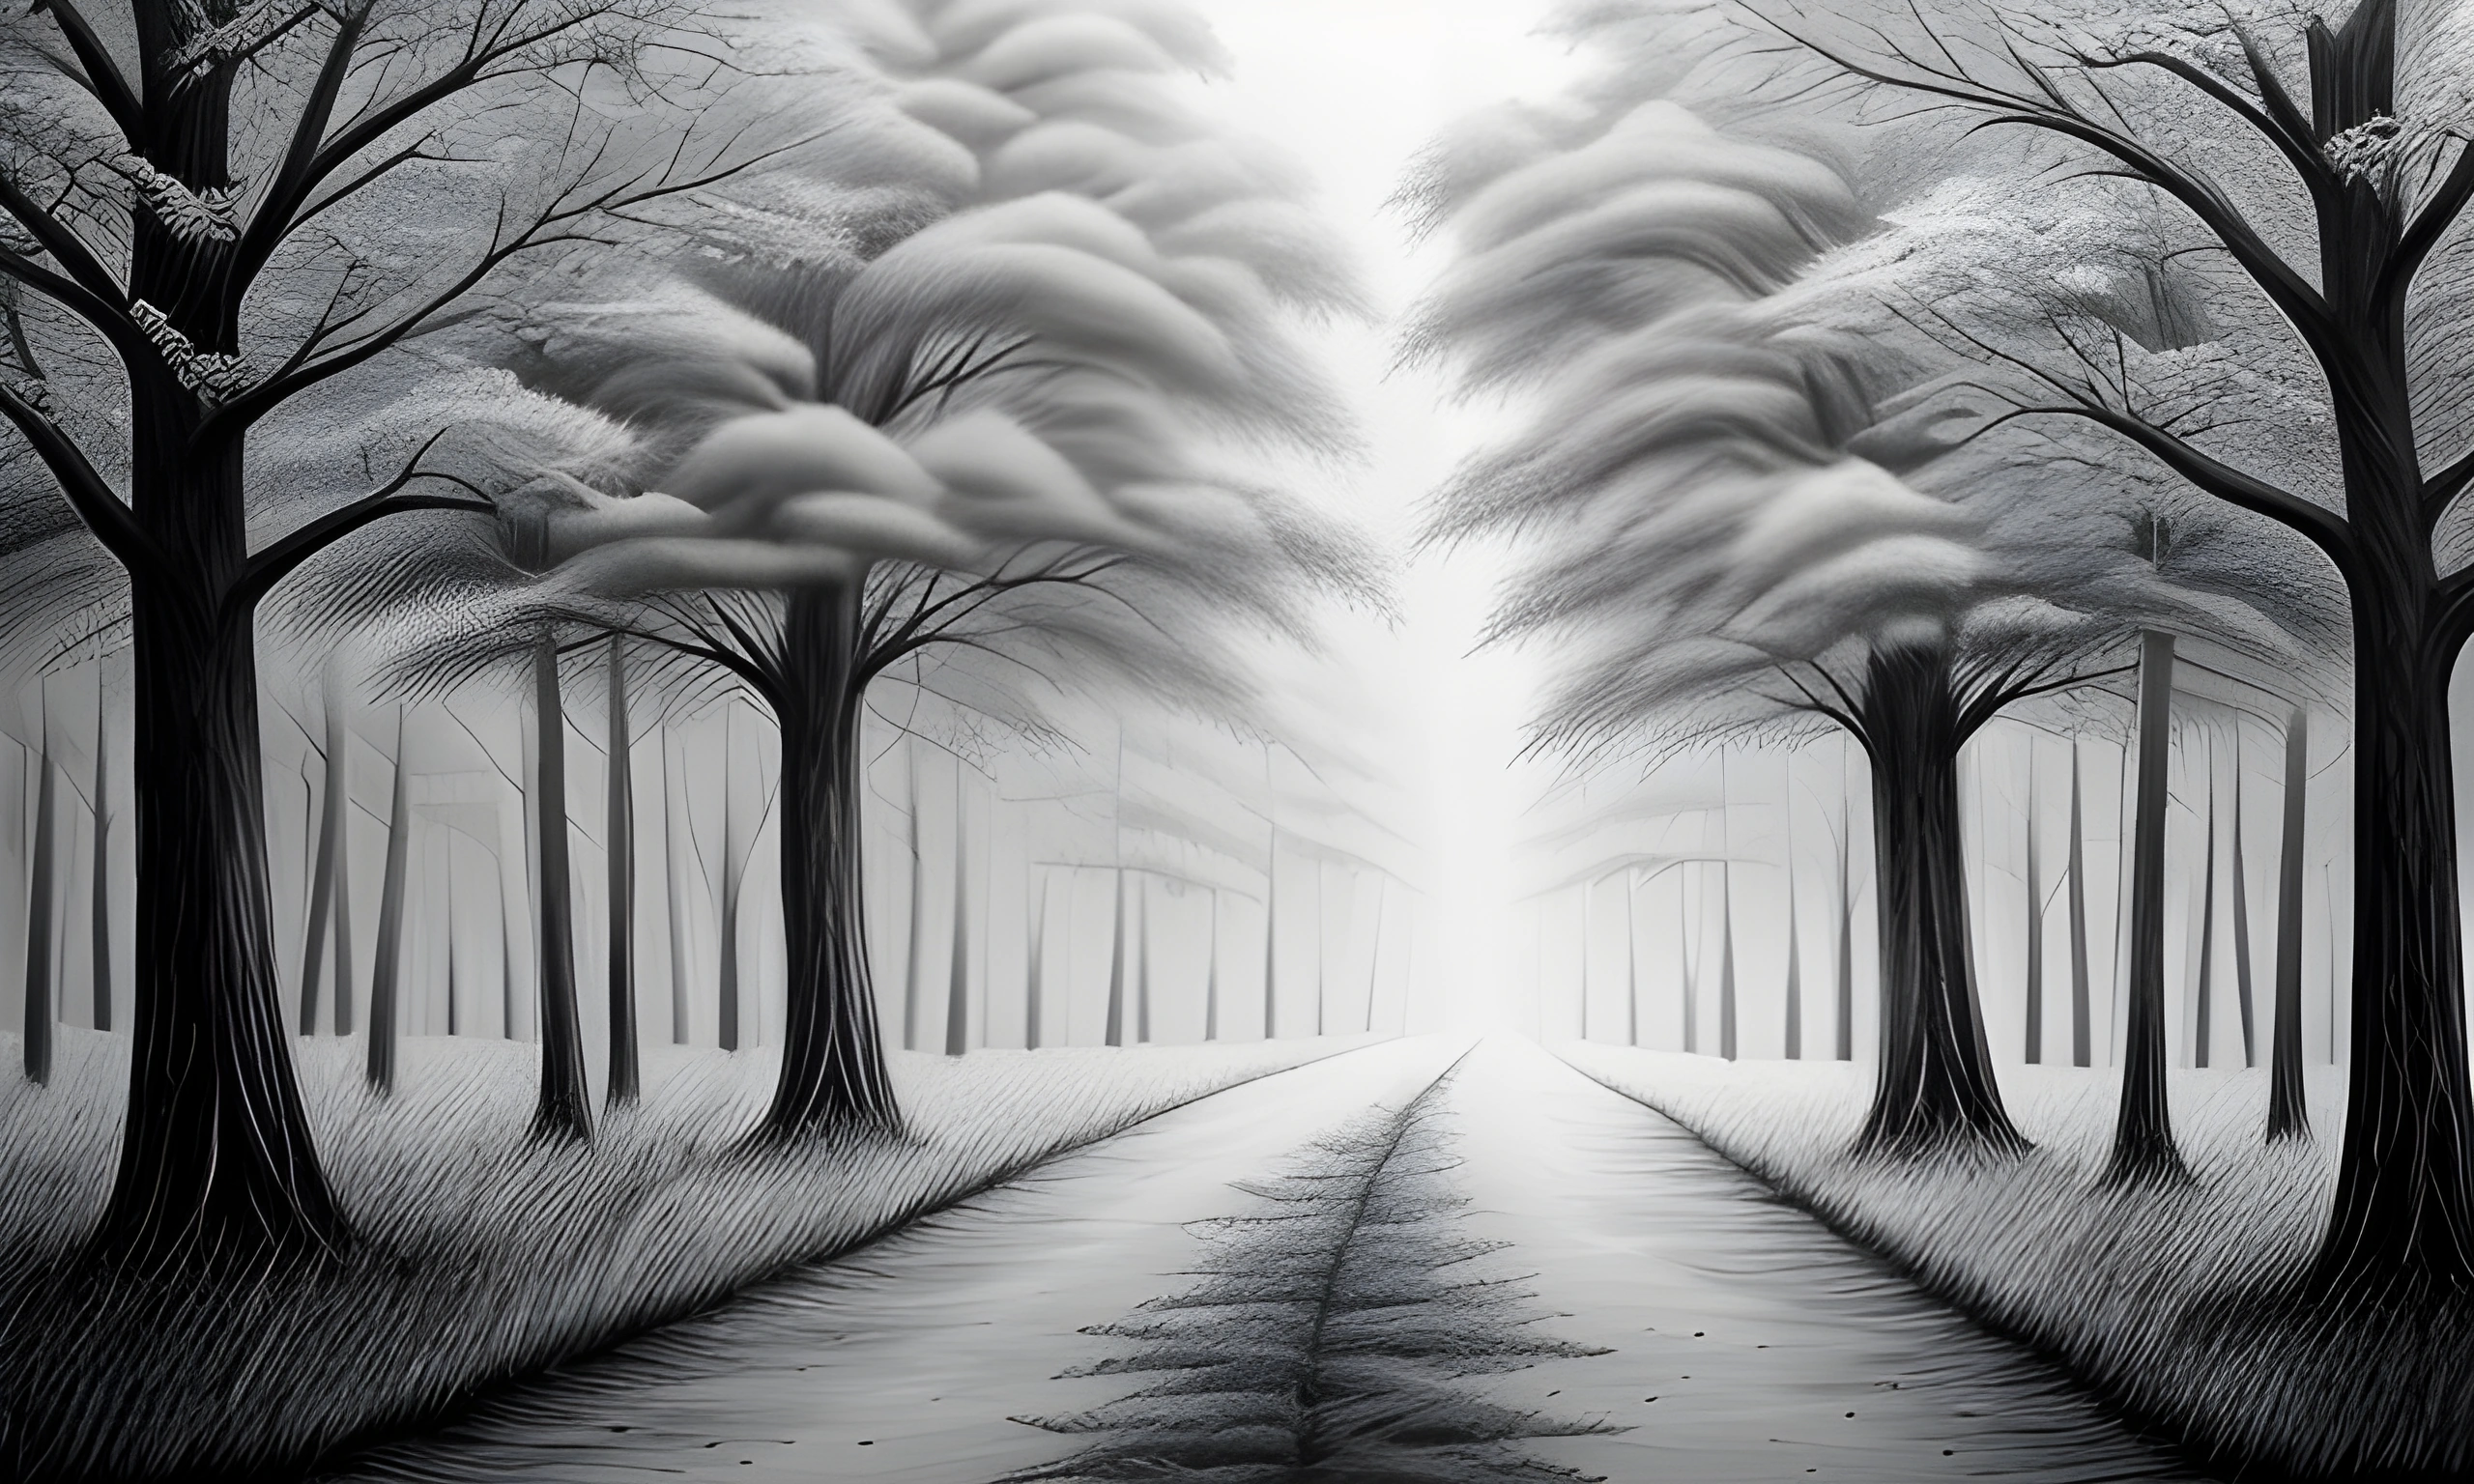 painting of a black and white image of a road in a forest